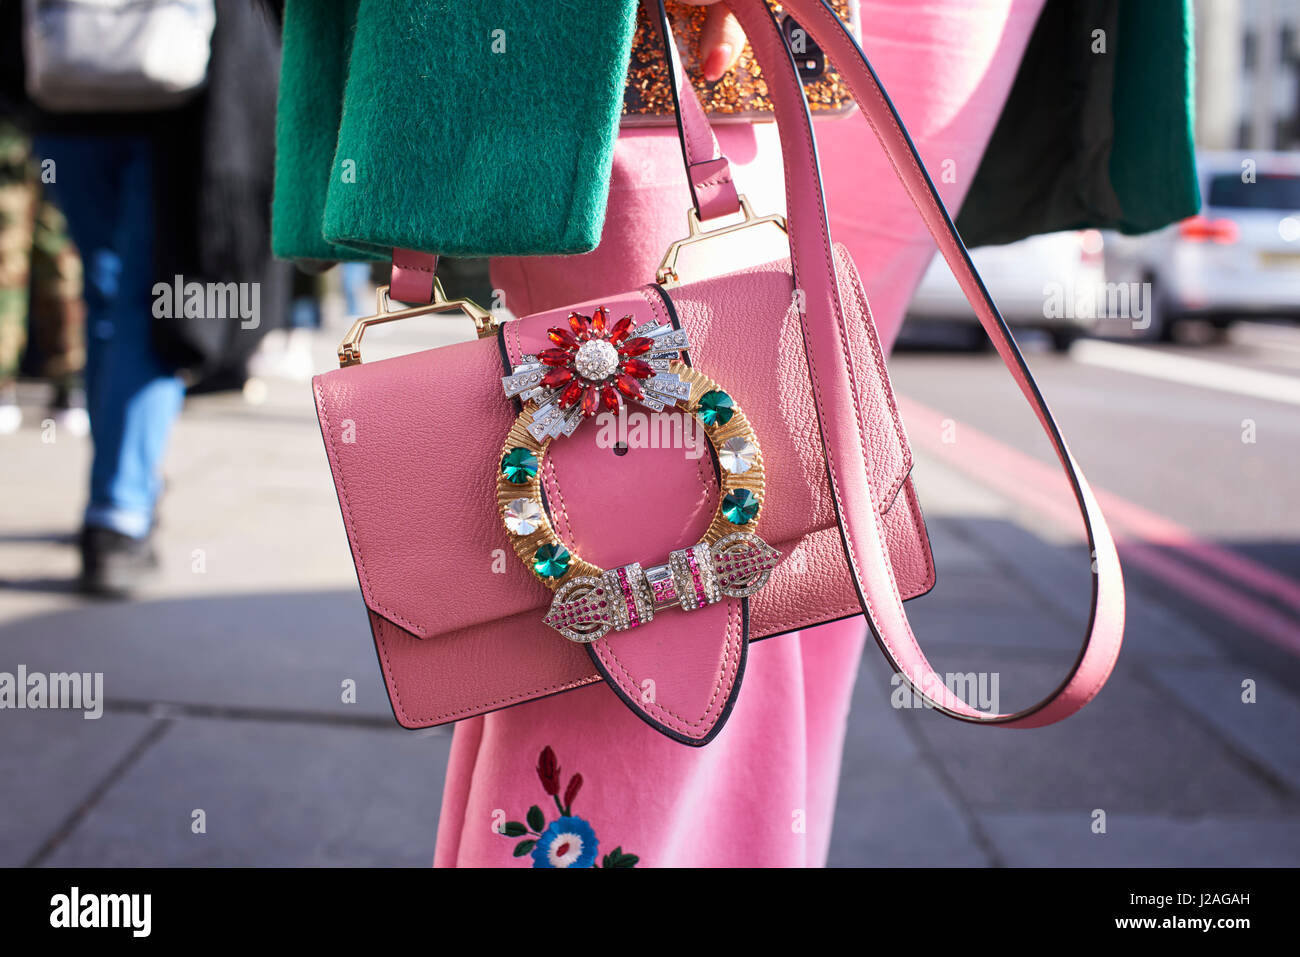 LONDON - FEBRUARY, 2017: Mid section of woman wearing pink skirt holding pink Miu Miu handbag and coat with floral decoration in street during London Fashion Week Stock Photo